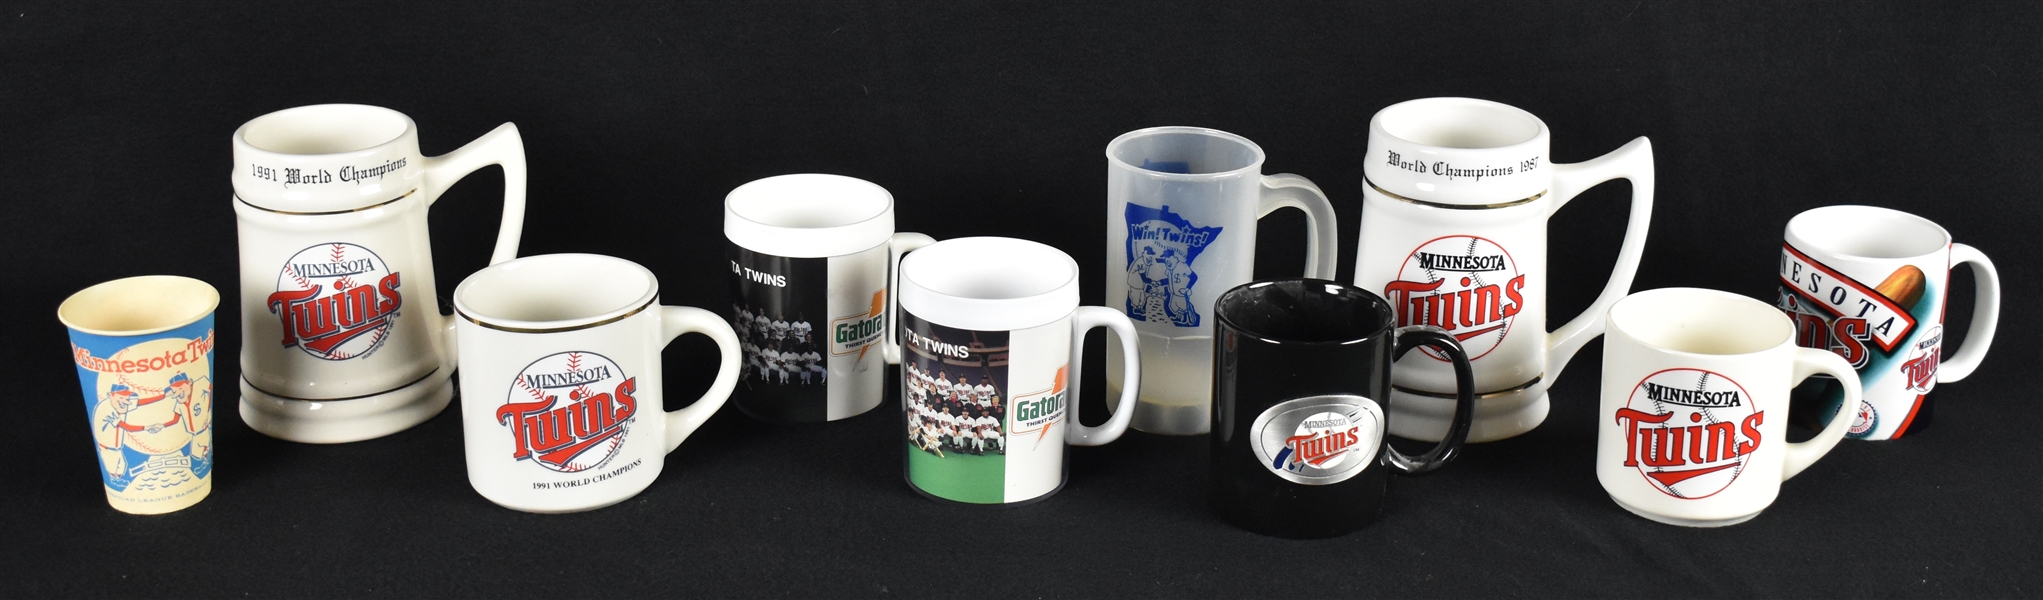 Minnesota Twins Stein & Cup Collection